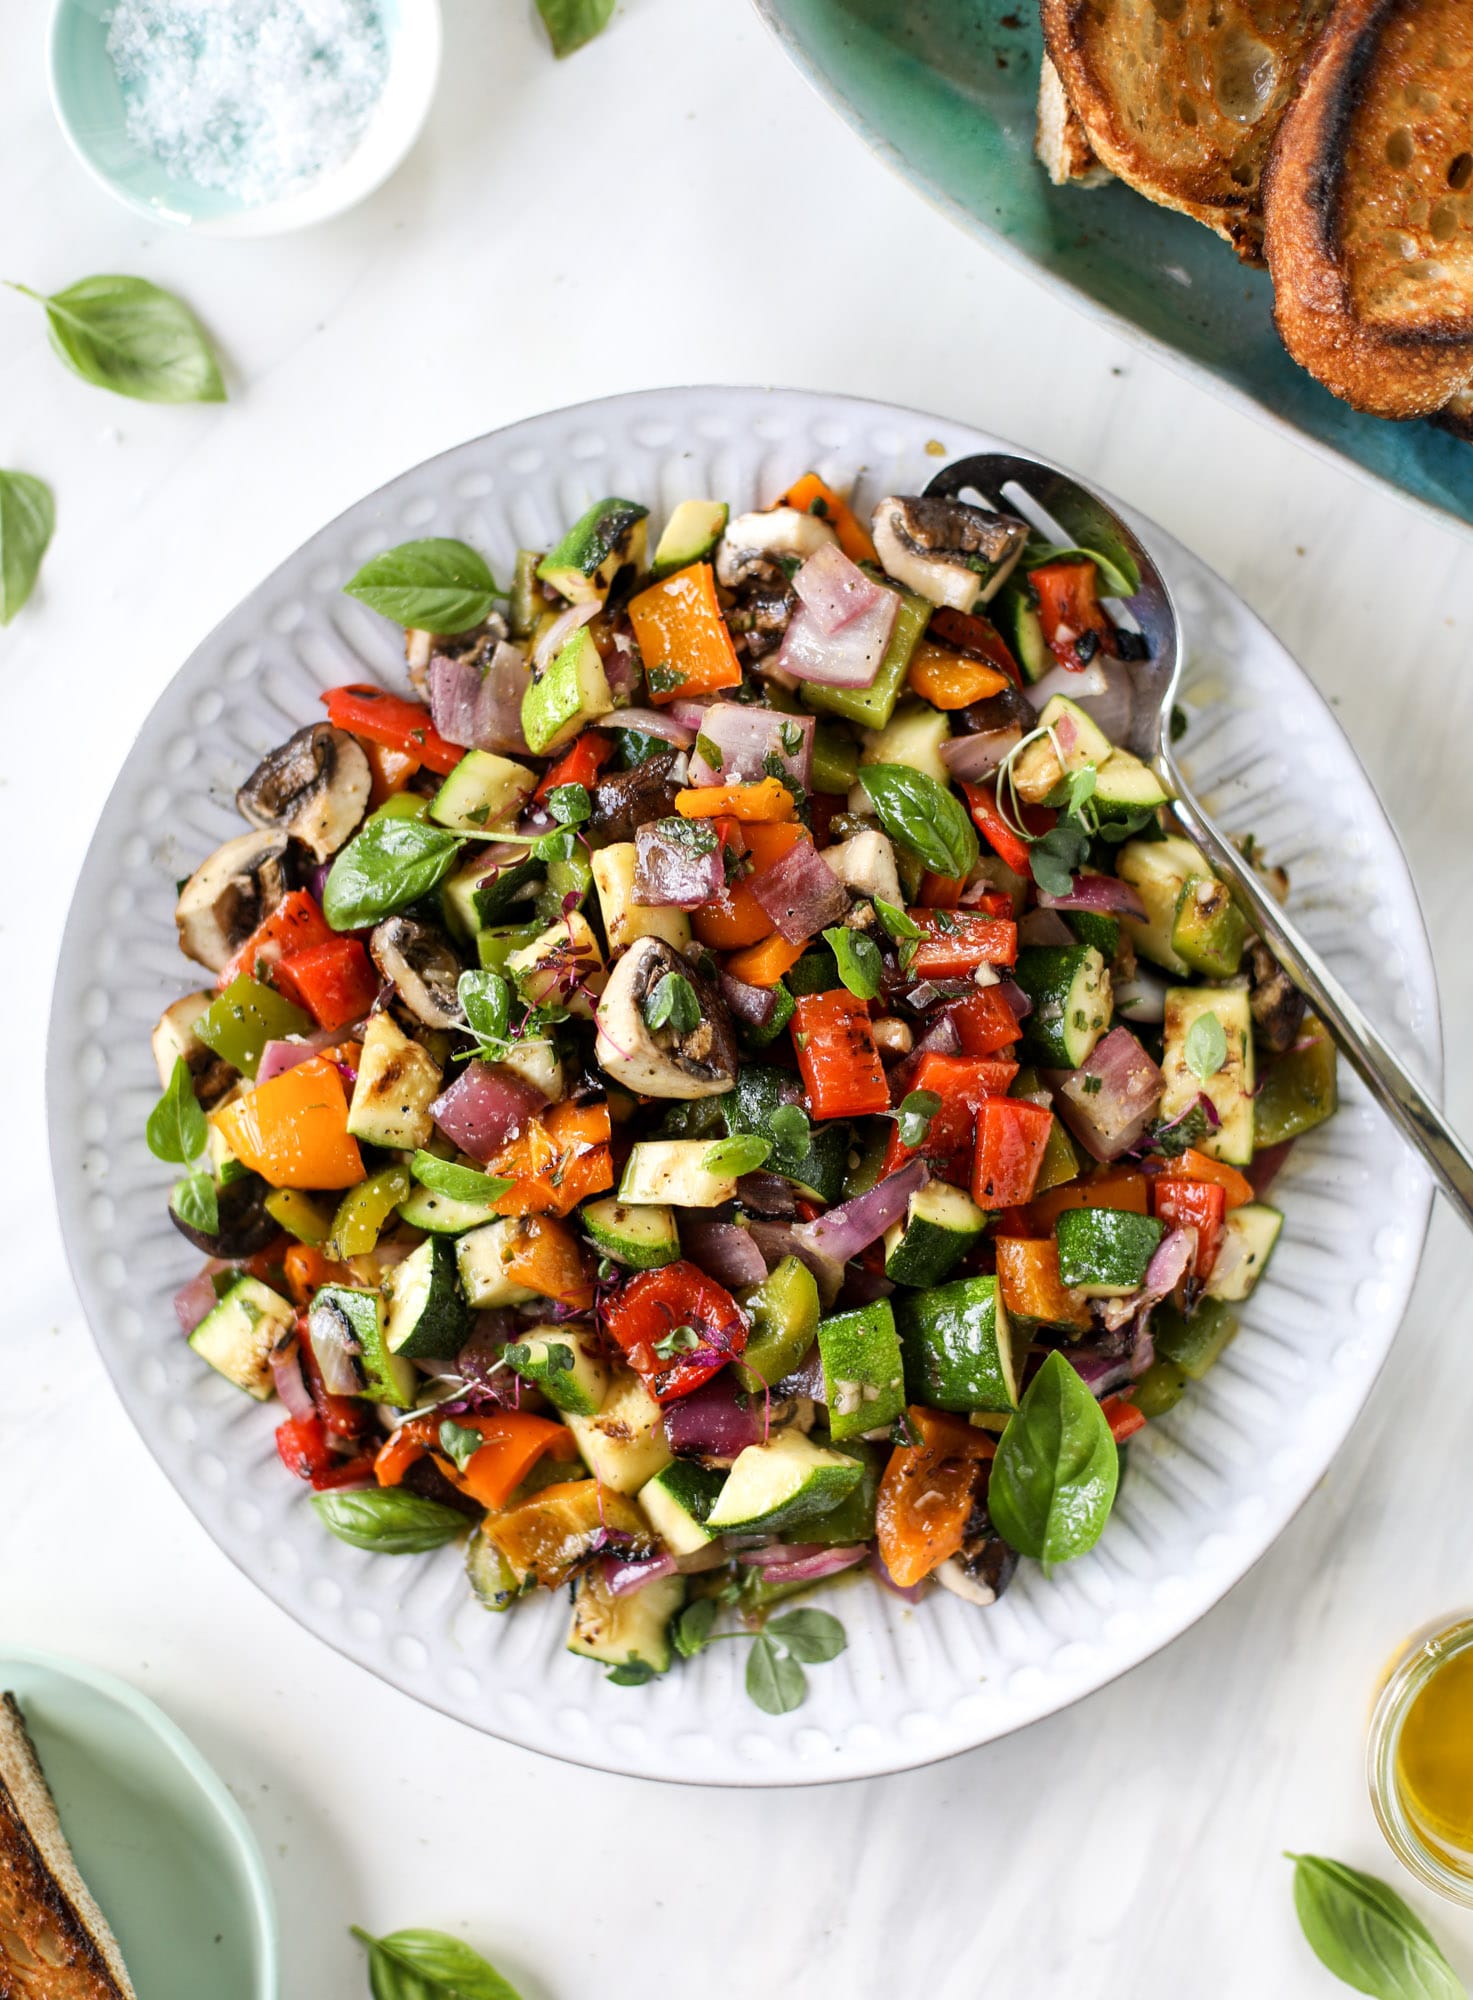 These are the best grilled vegetables ever! You grill your veggies and chop them into the perfect bite, then drizzle them with a fabulous fresh basil vinaigrette. Delish! It doesn't end there; serve these with grilled garlic toast and everyone will freak! I howsweeteats.com #best #grilled #vegetables #veggies #basil #bread